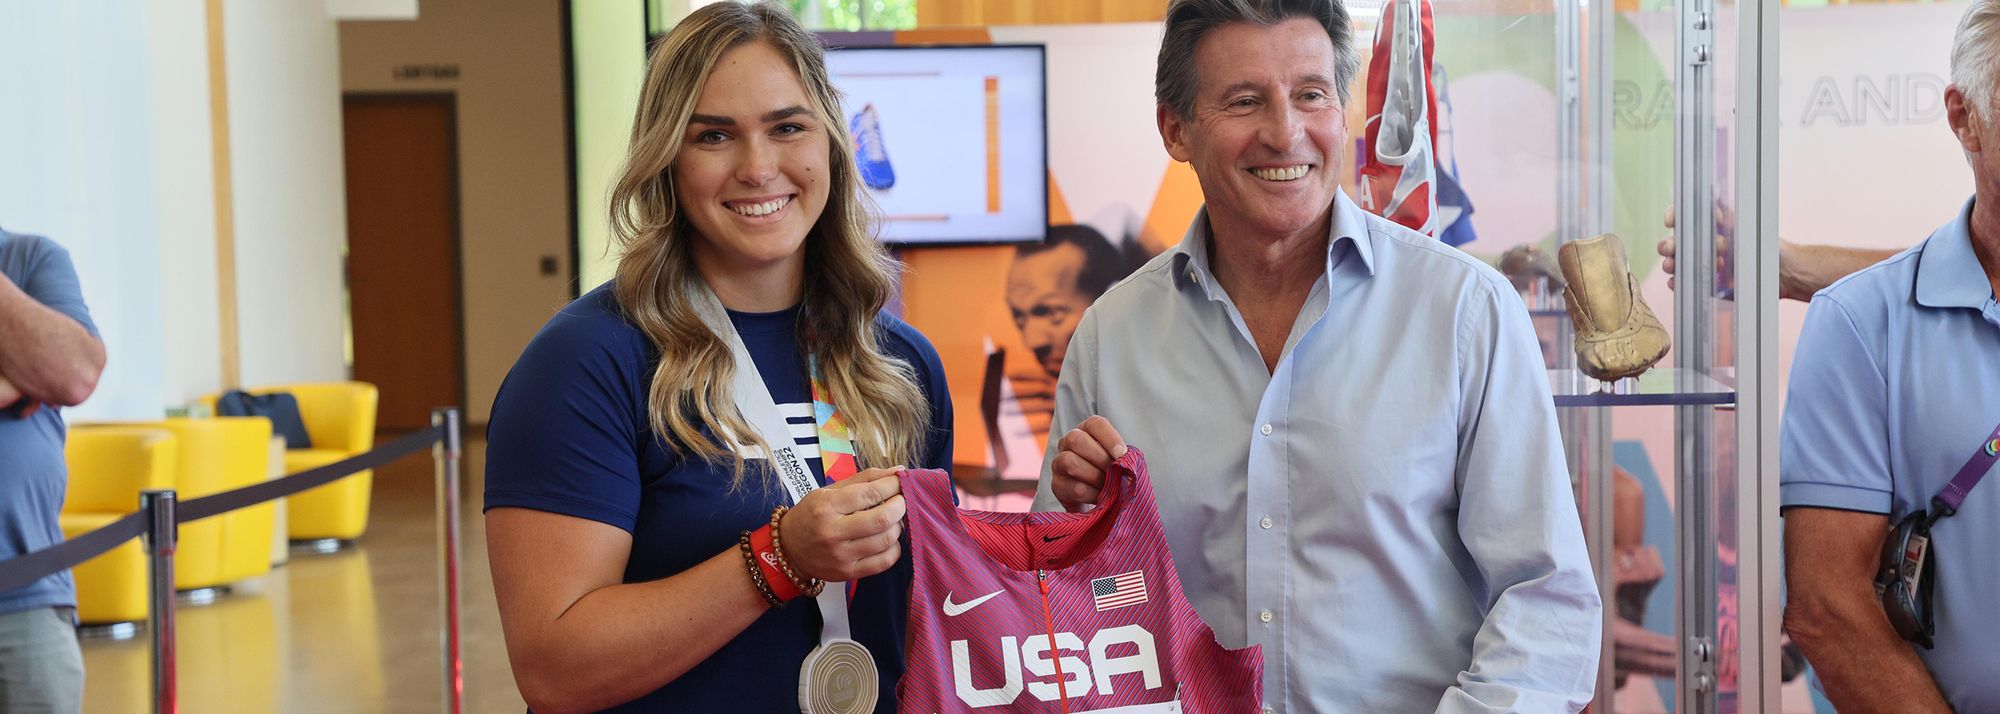 Two days after winning the world hammer title, Brooke Andersen presented the singlet and bib she wore to World Athletics President Sebastian Coe